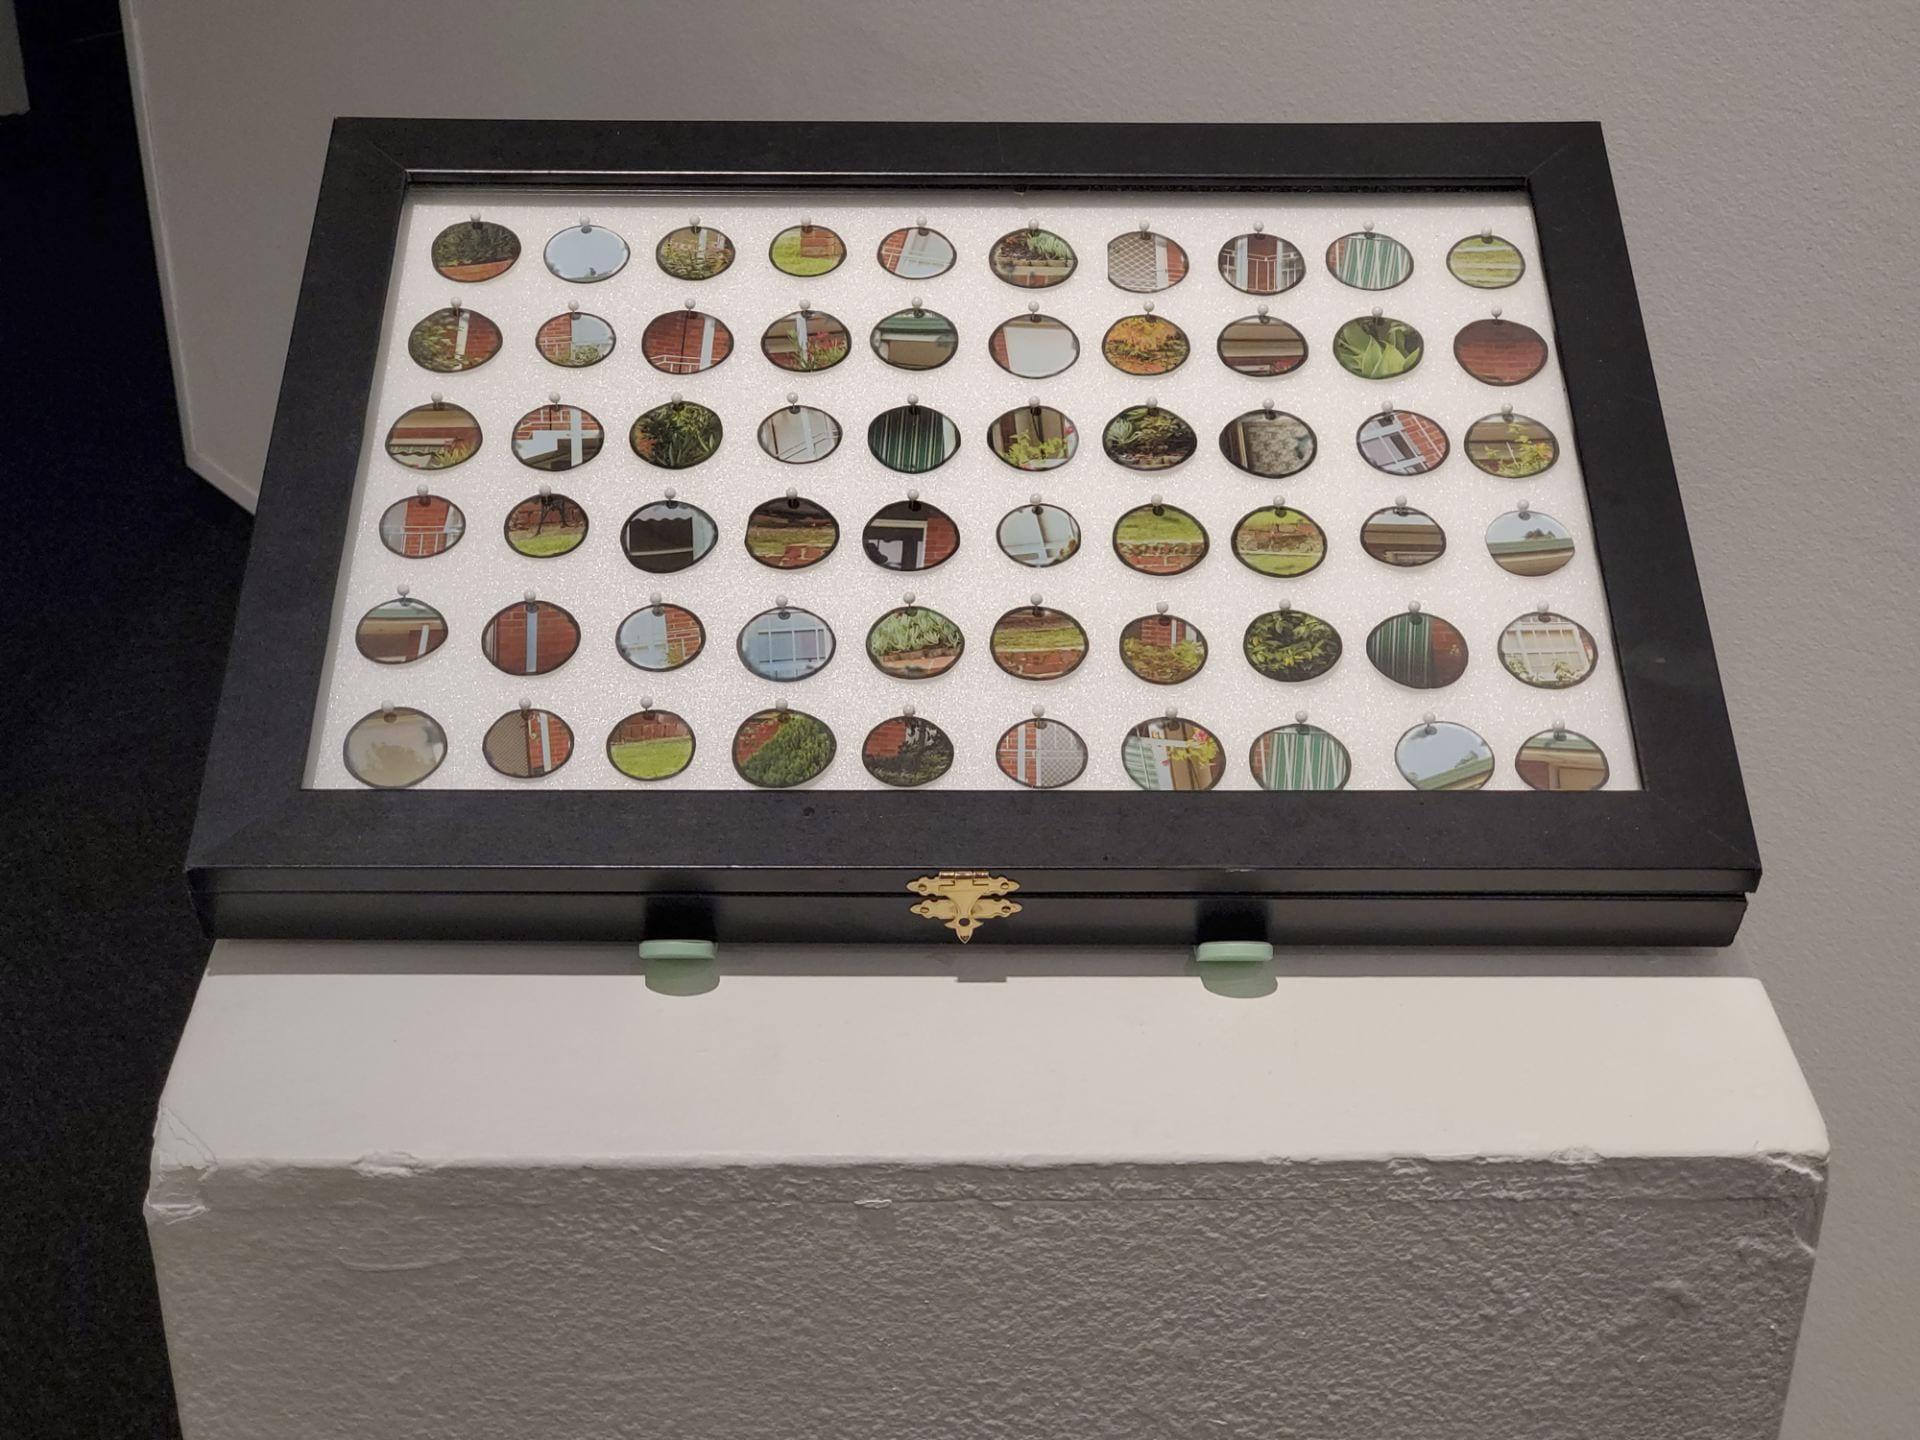 display box of the small round photographs taken at the housing estate